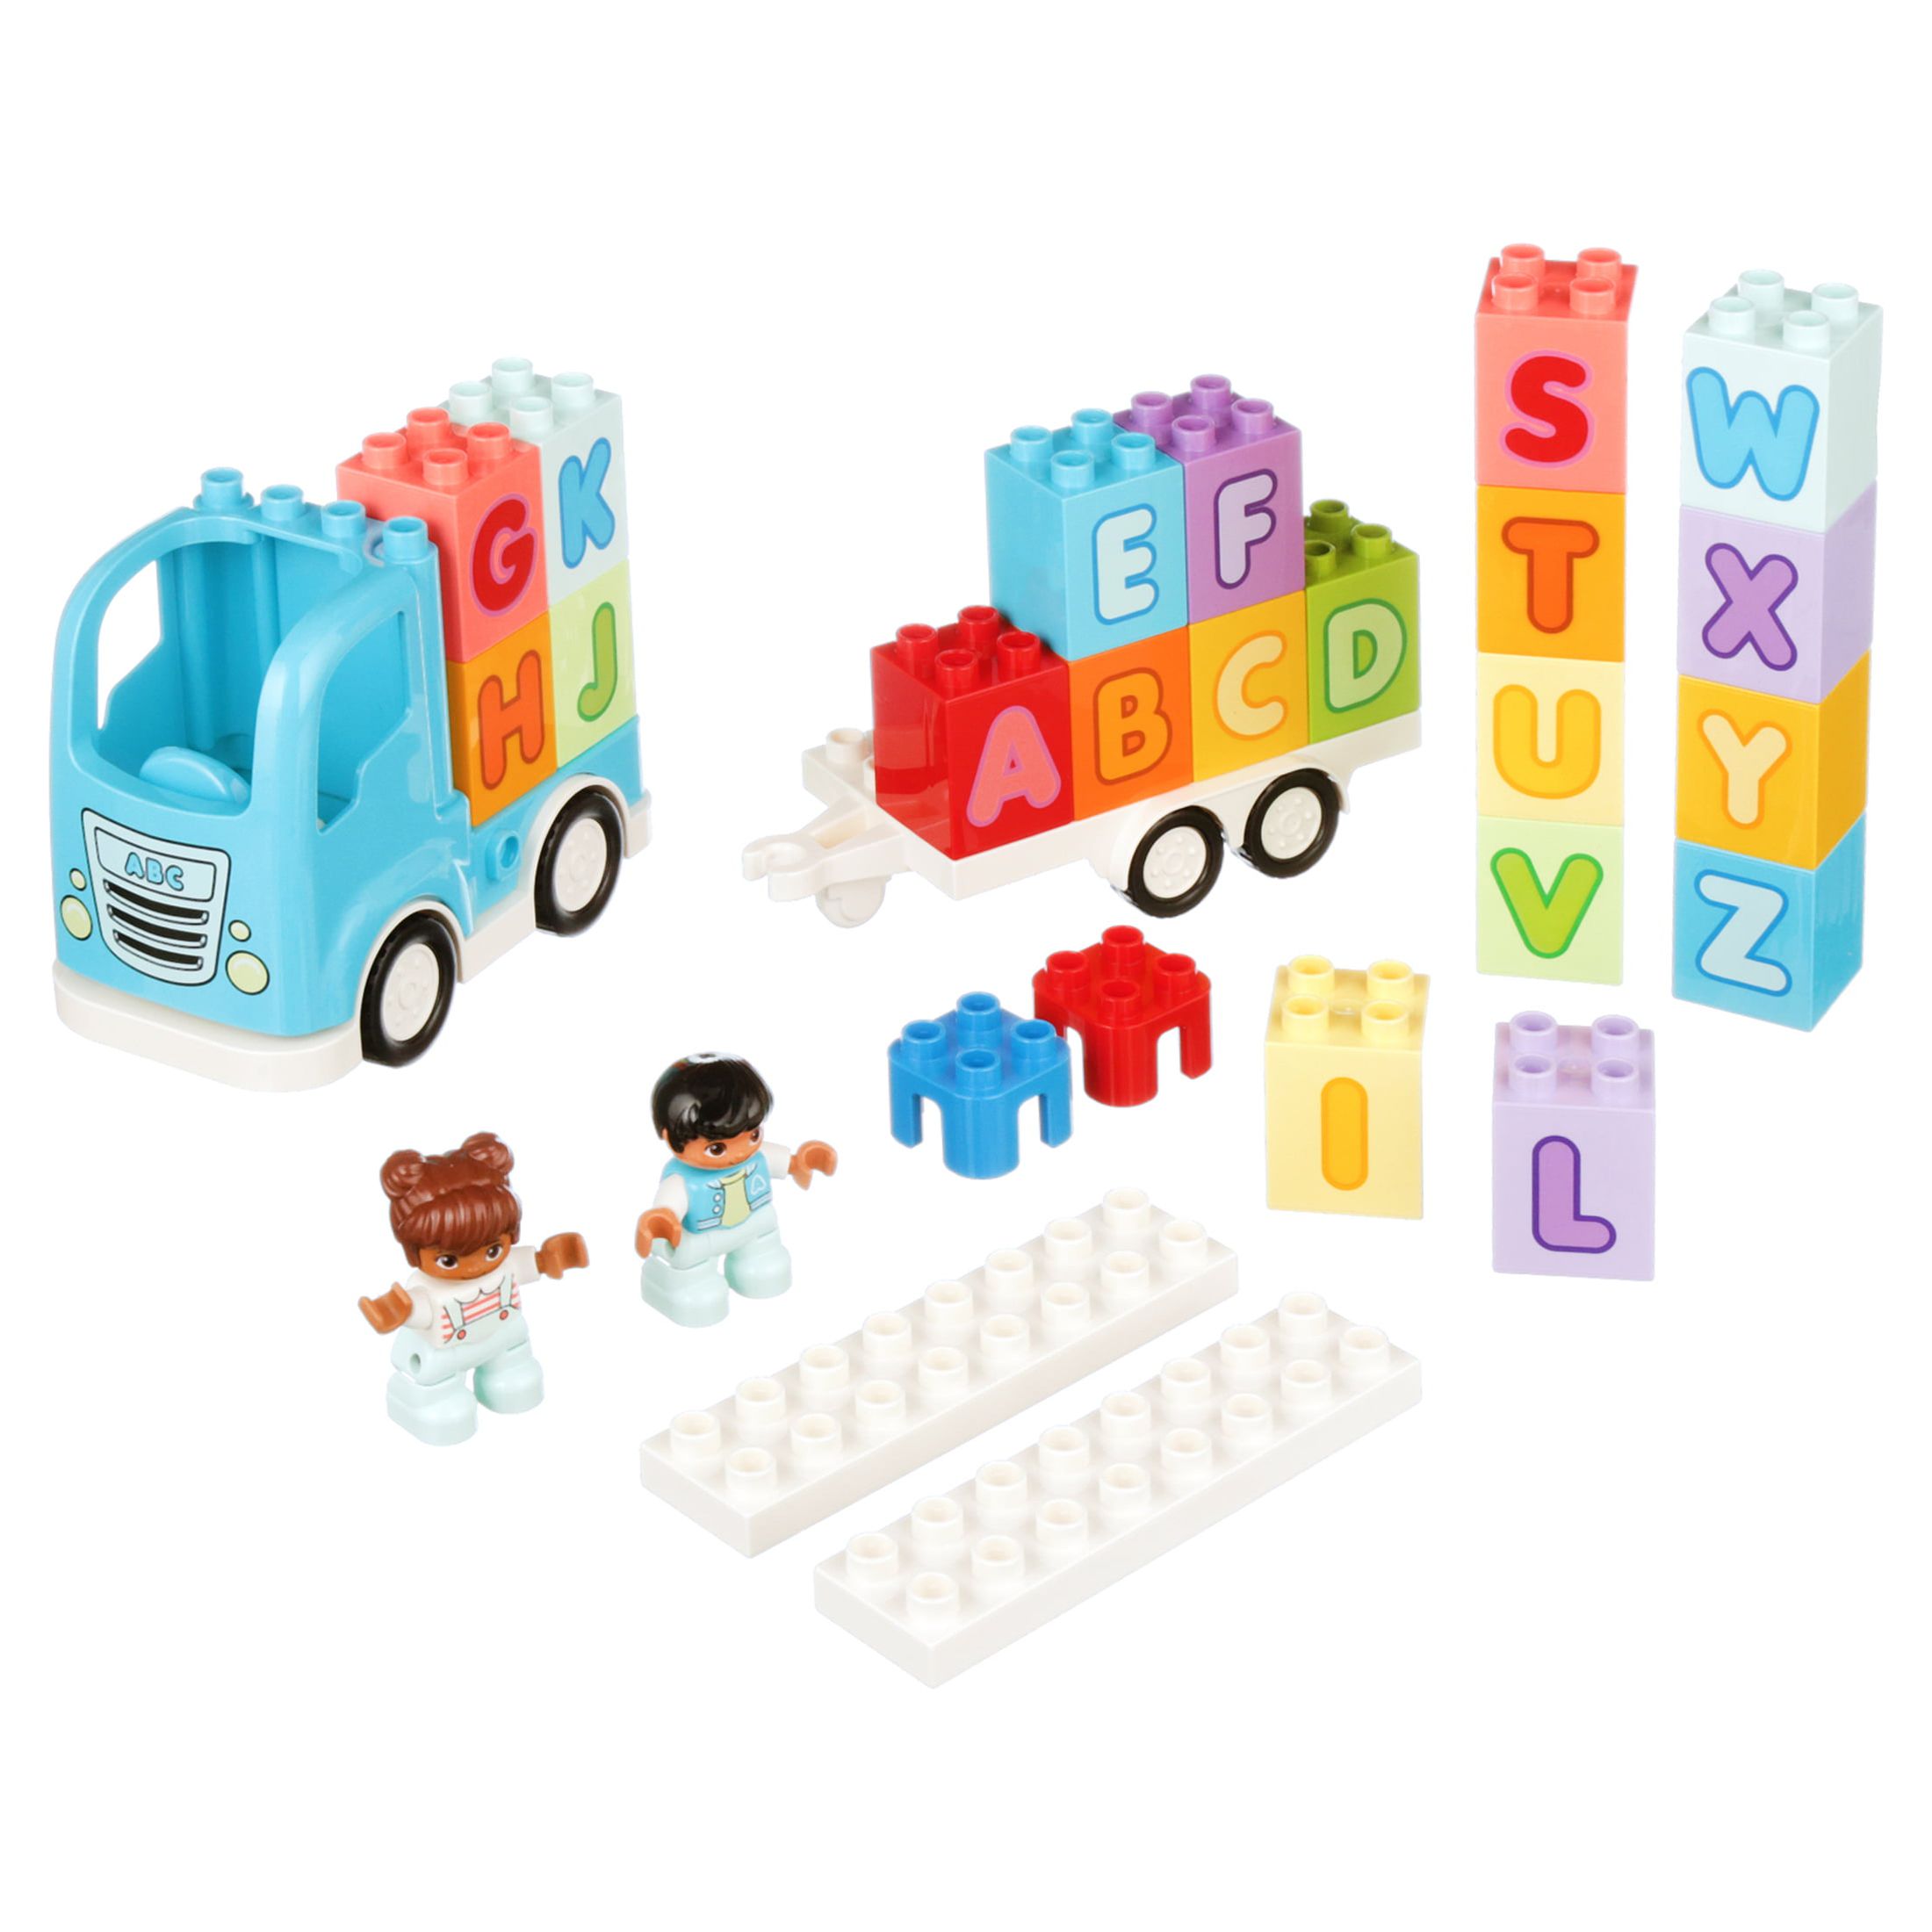 LEGO DUPLO My First Alphabet Truck 10915 Educational Building Toy for Toddlers (36 Pieces) - image 9 of 12